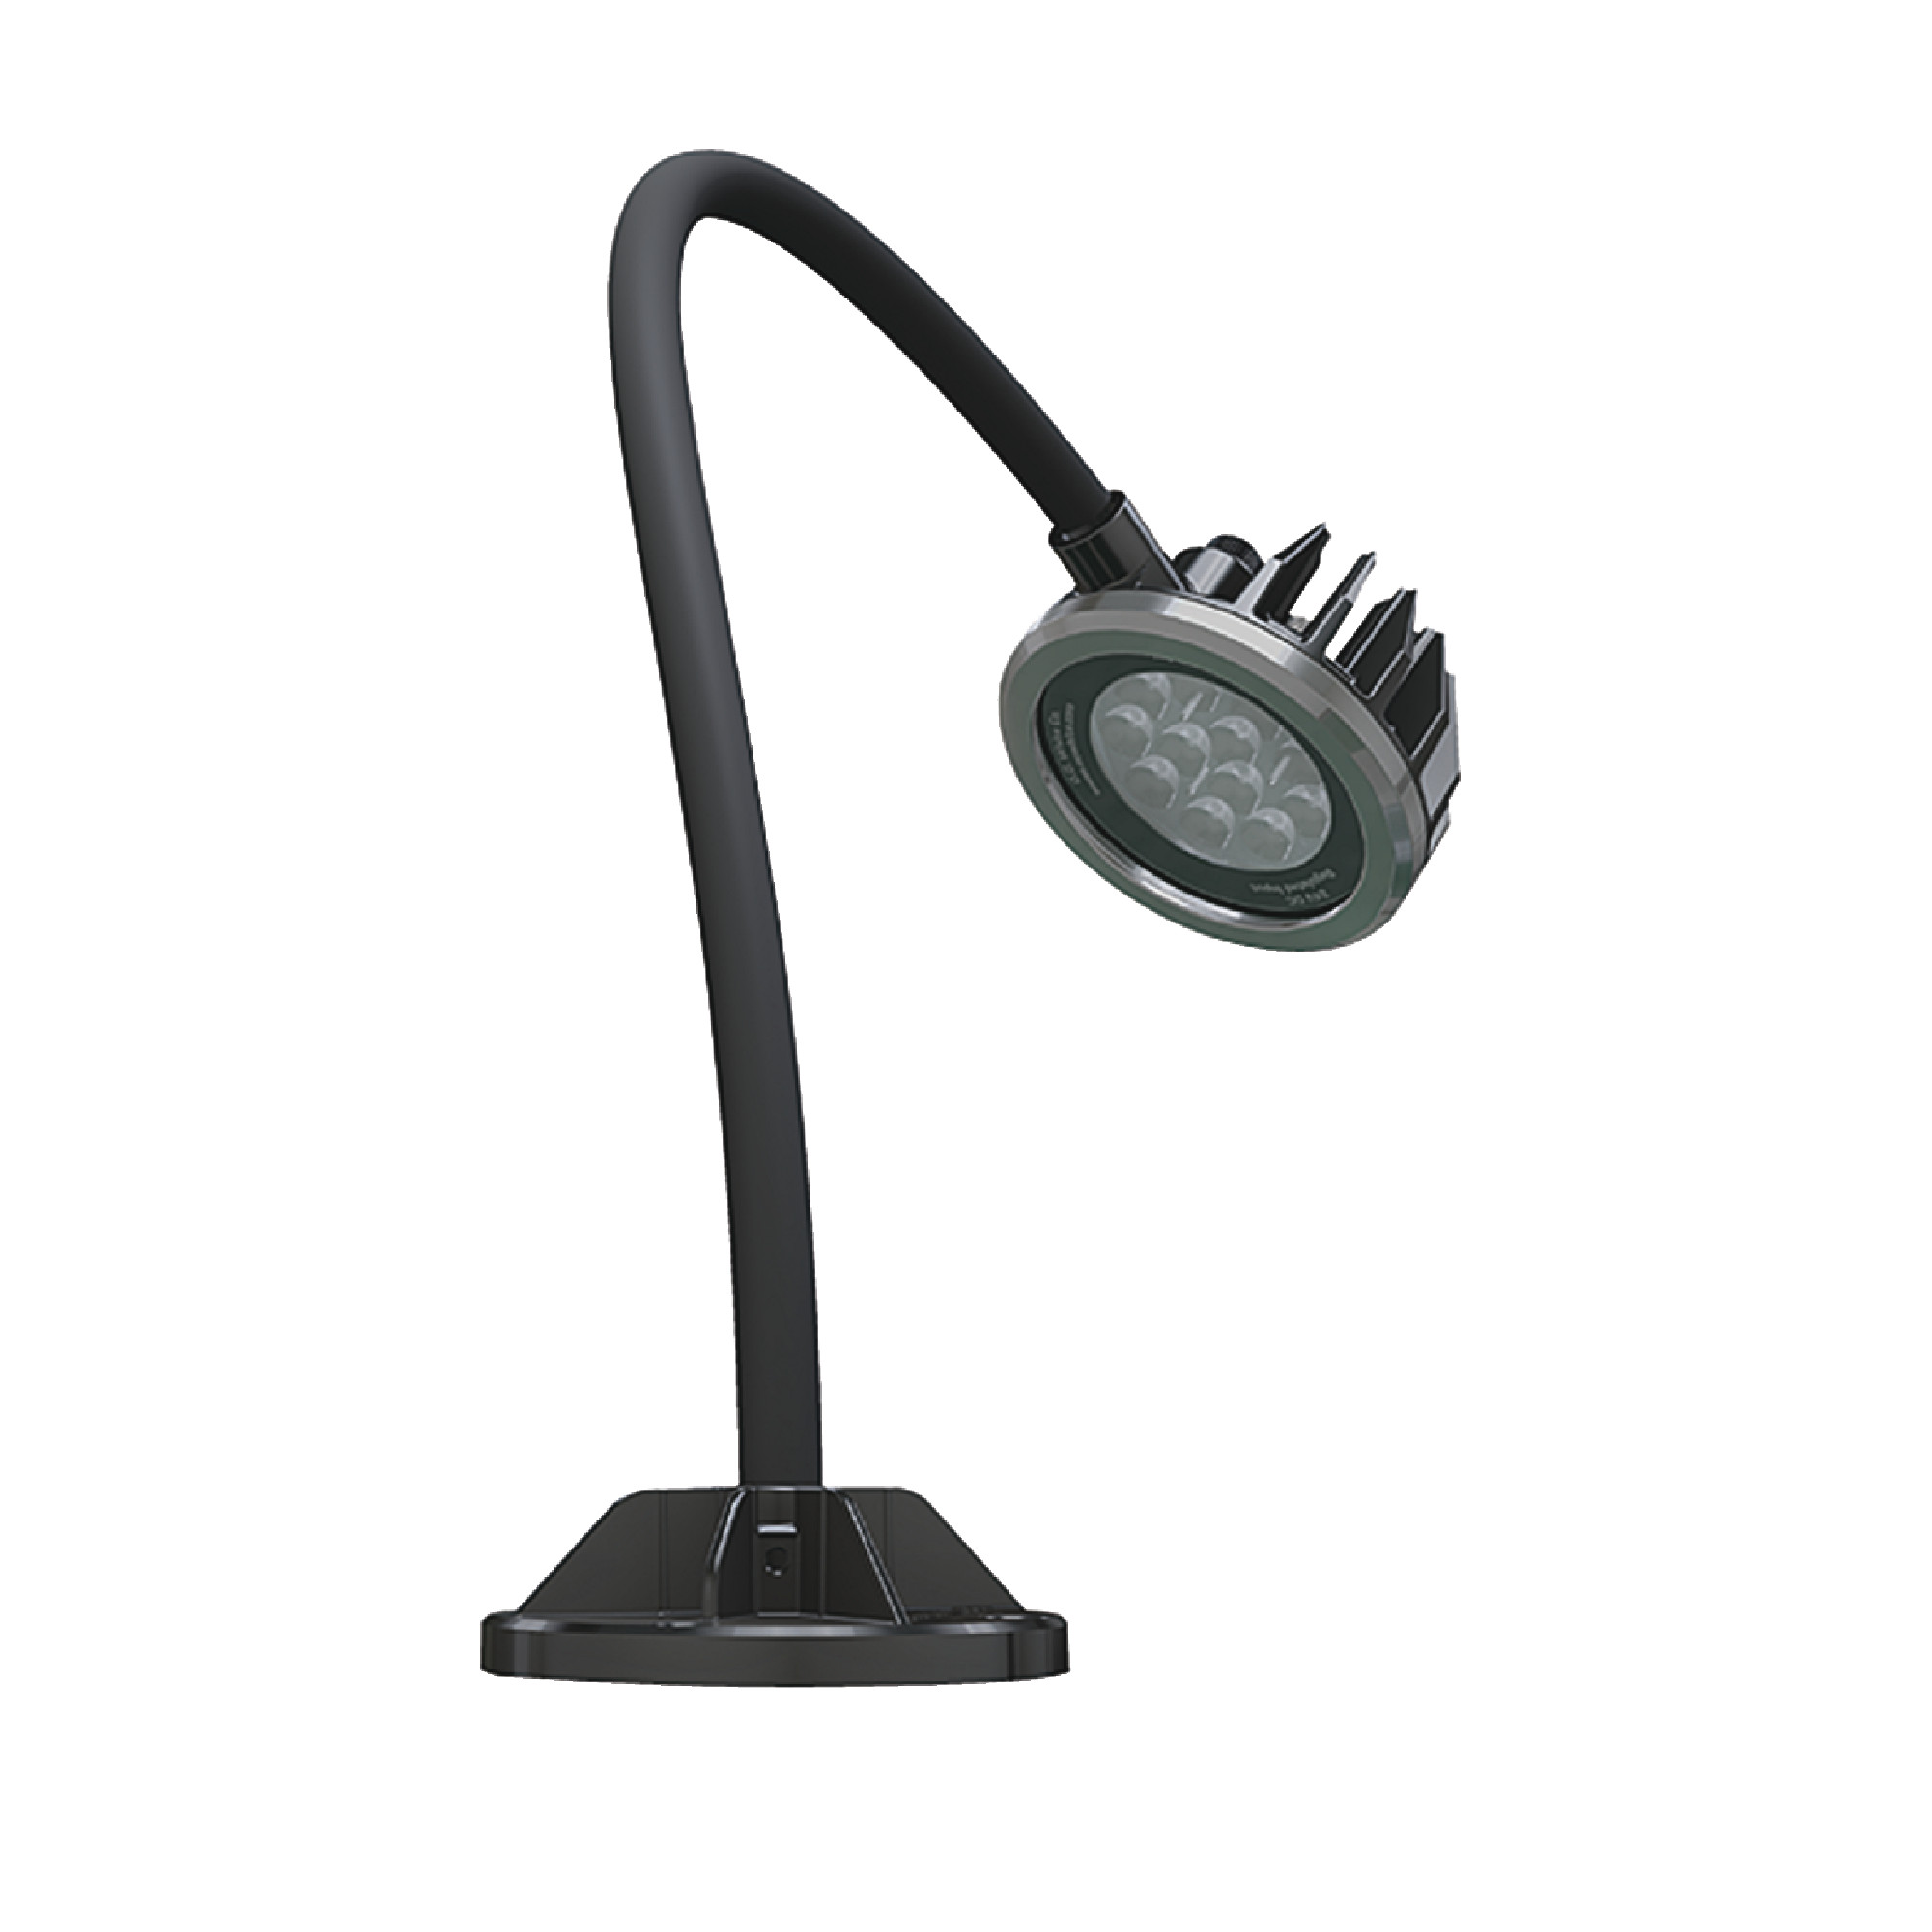 LED Machine Spotlight-12" Gooseneck Adjustable Screw Mount or Magnet with Built-in Dimming Switch